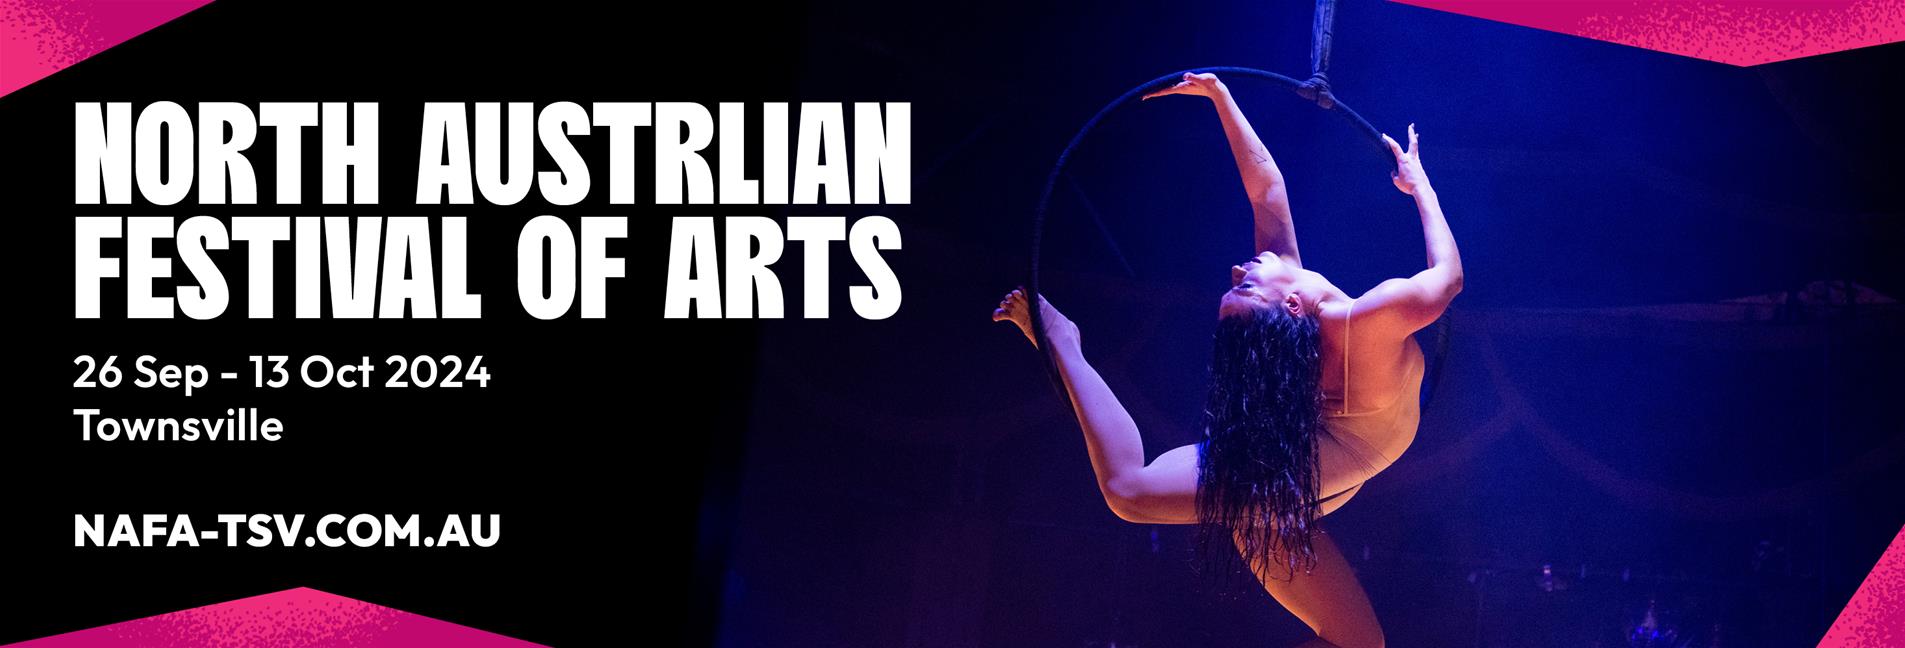 alt= "Promotional banner for North Australian Festival Of Arts showing a performer on an aerial hoop, event details from 26 Sept - 13 Oct 2024 in Townsville, website link at bottom.